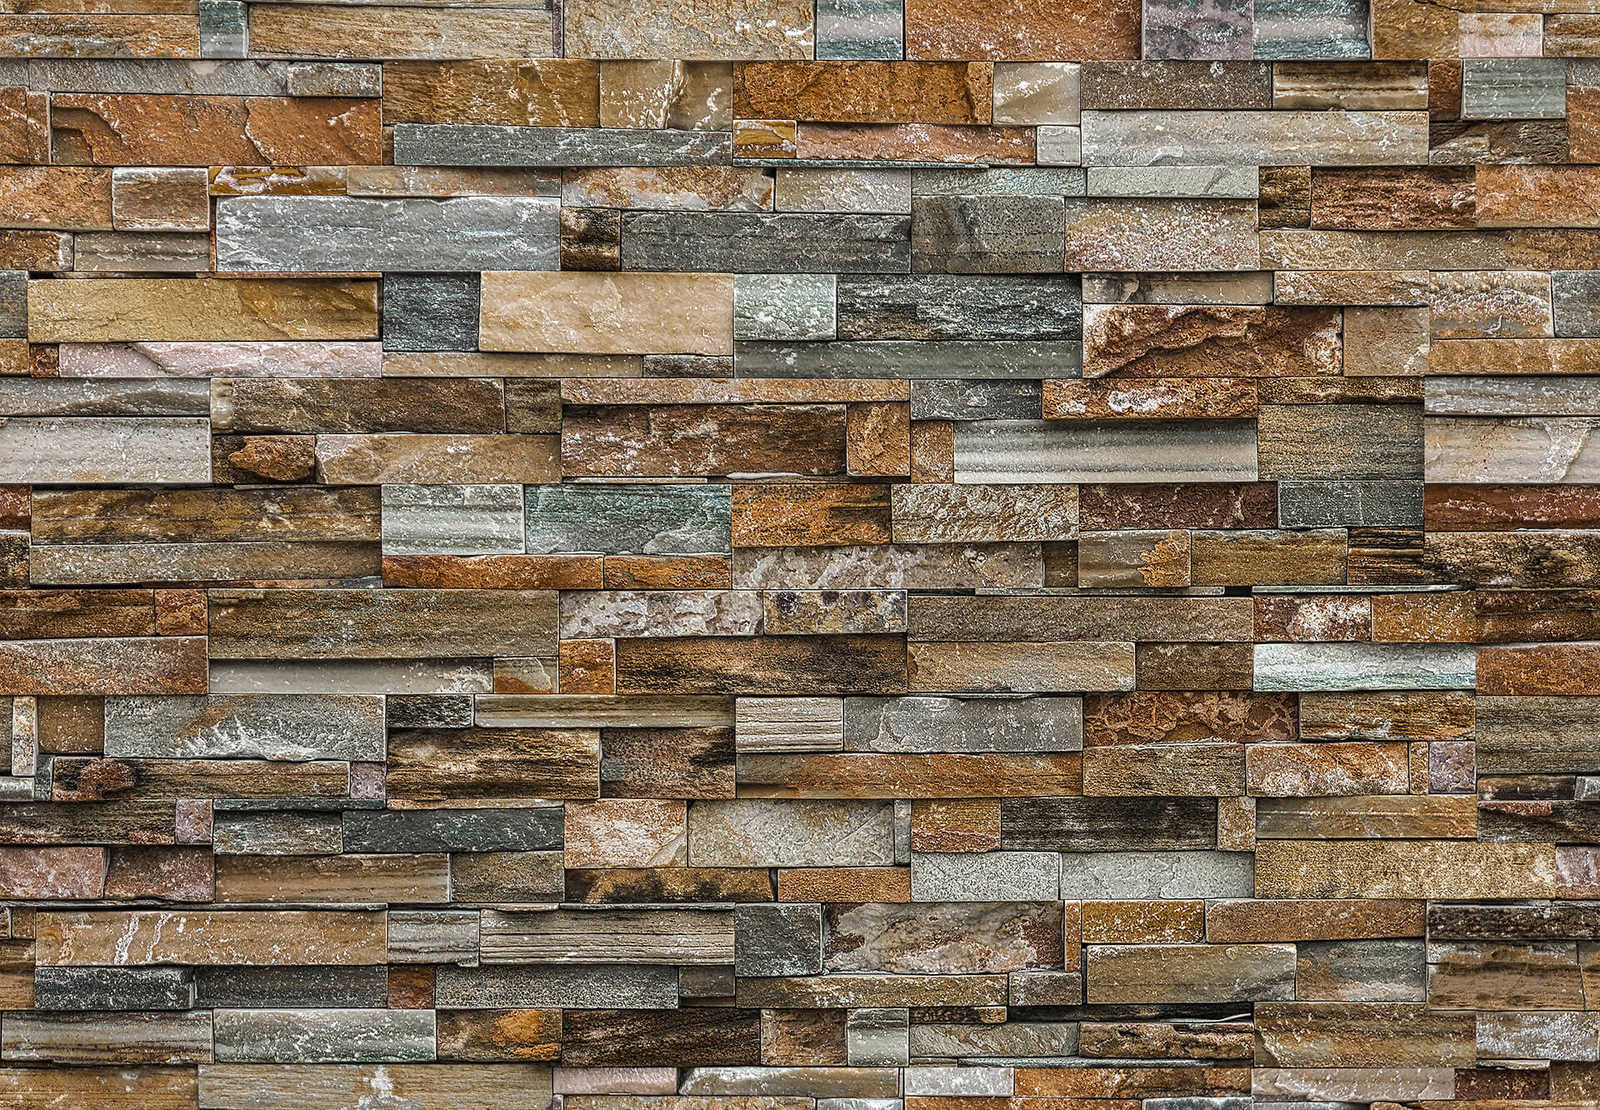         Stone wall mural with 3D brickwork - brown, grey
    